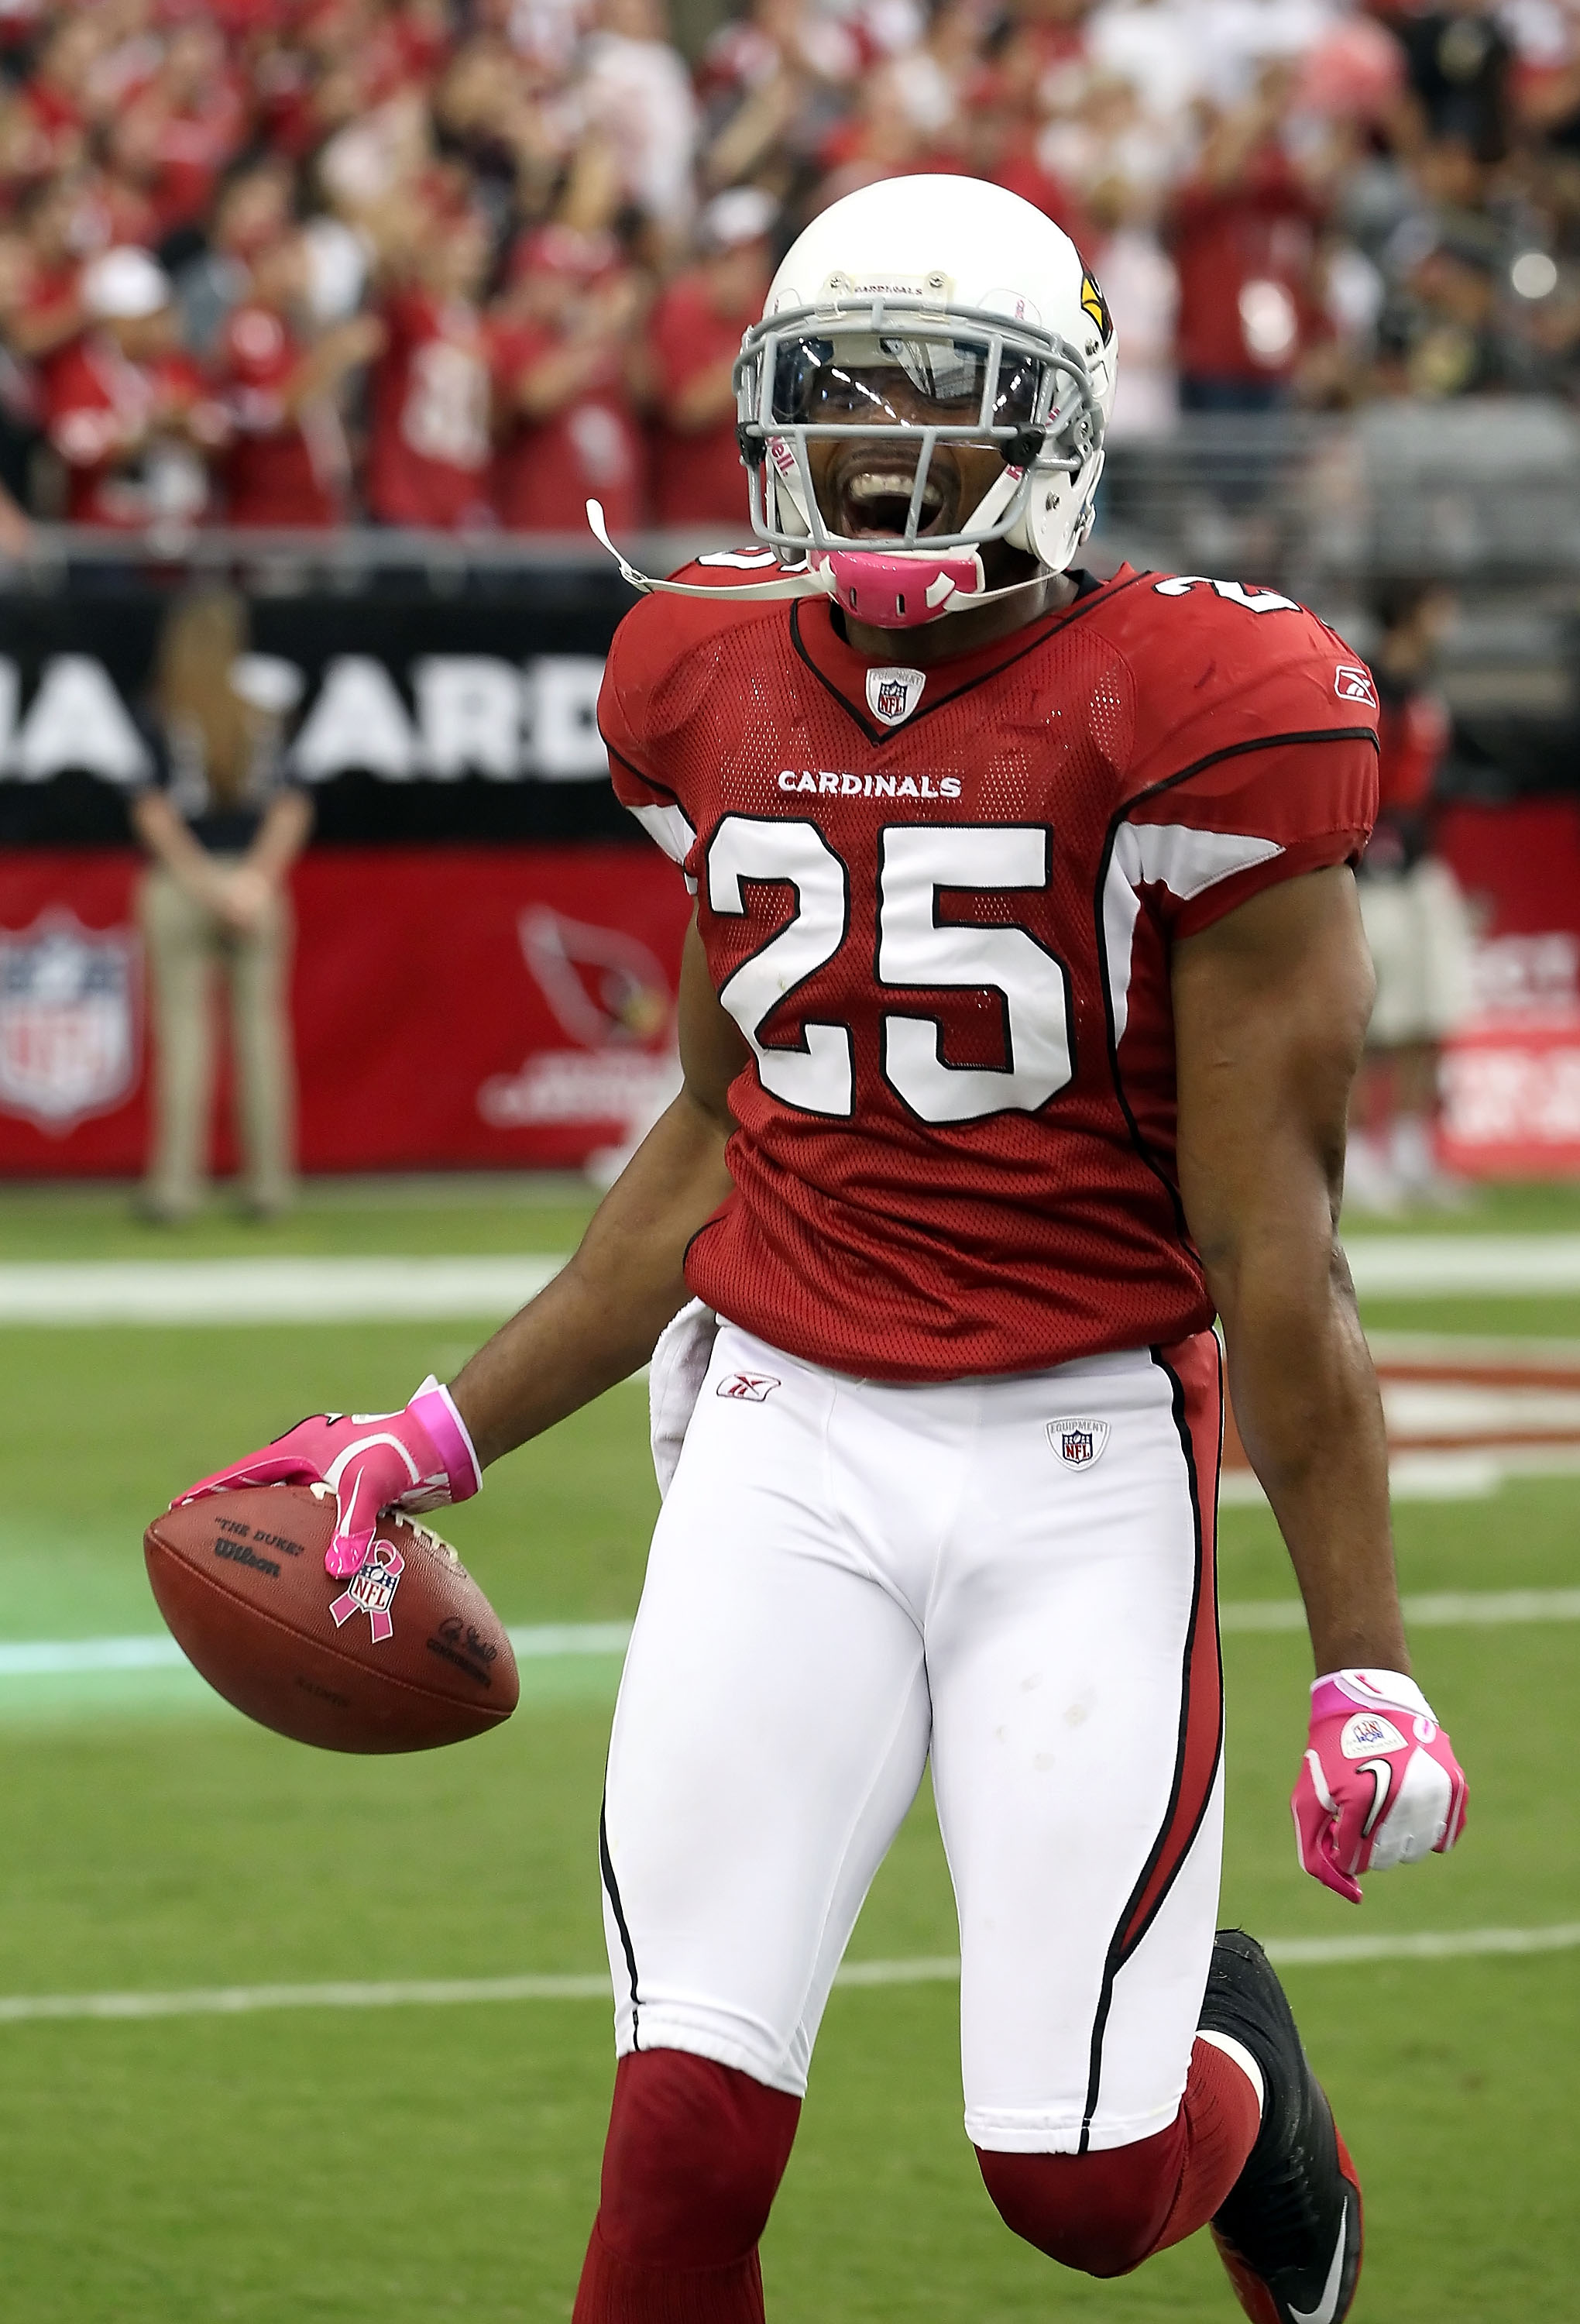 Arizona Cardinals 2010 Season in Review: The Good, the Bad and the